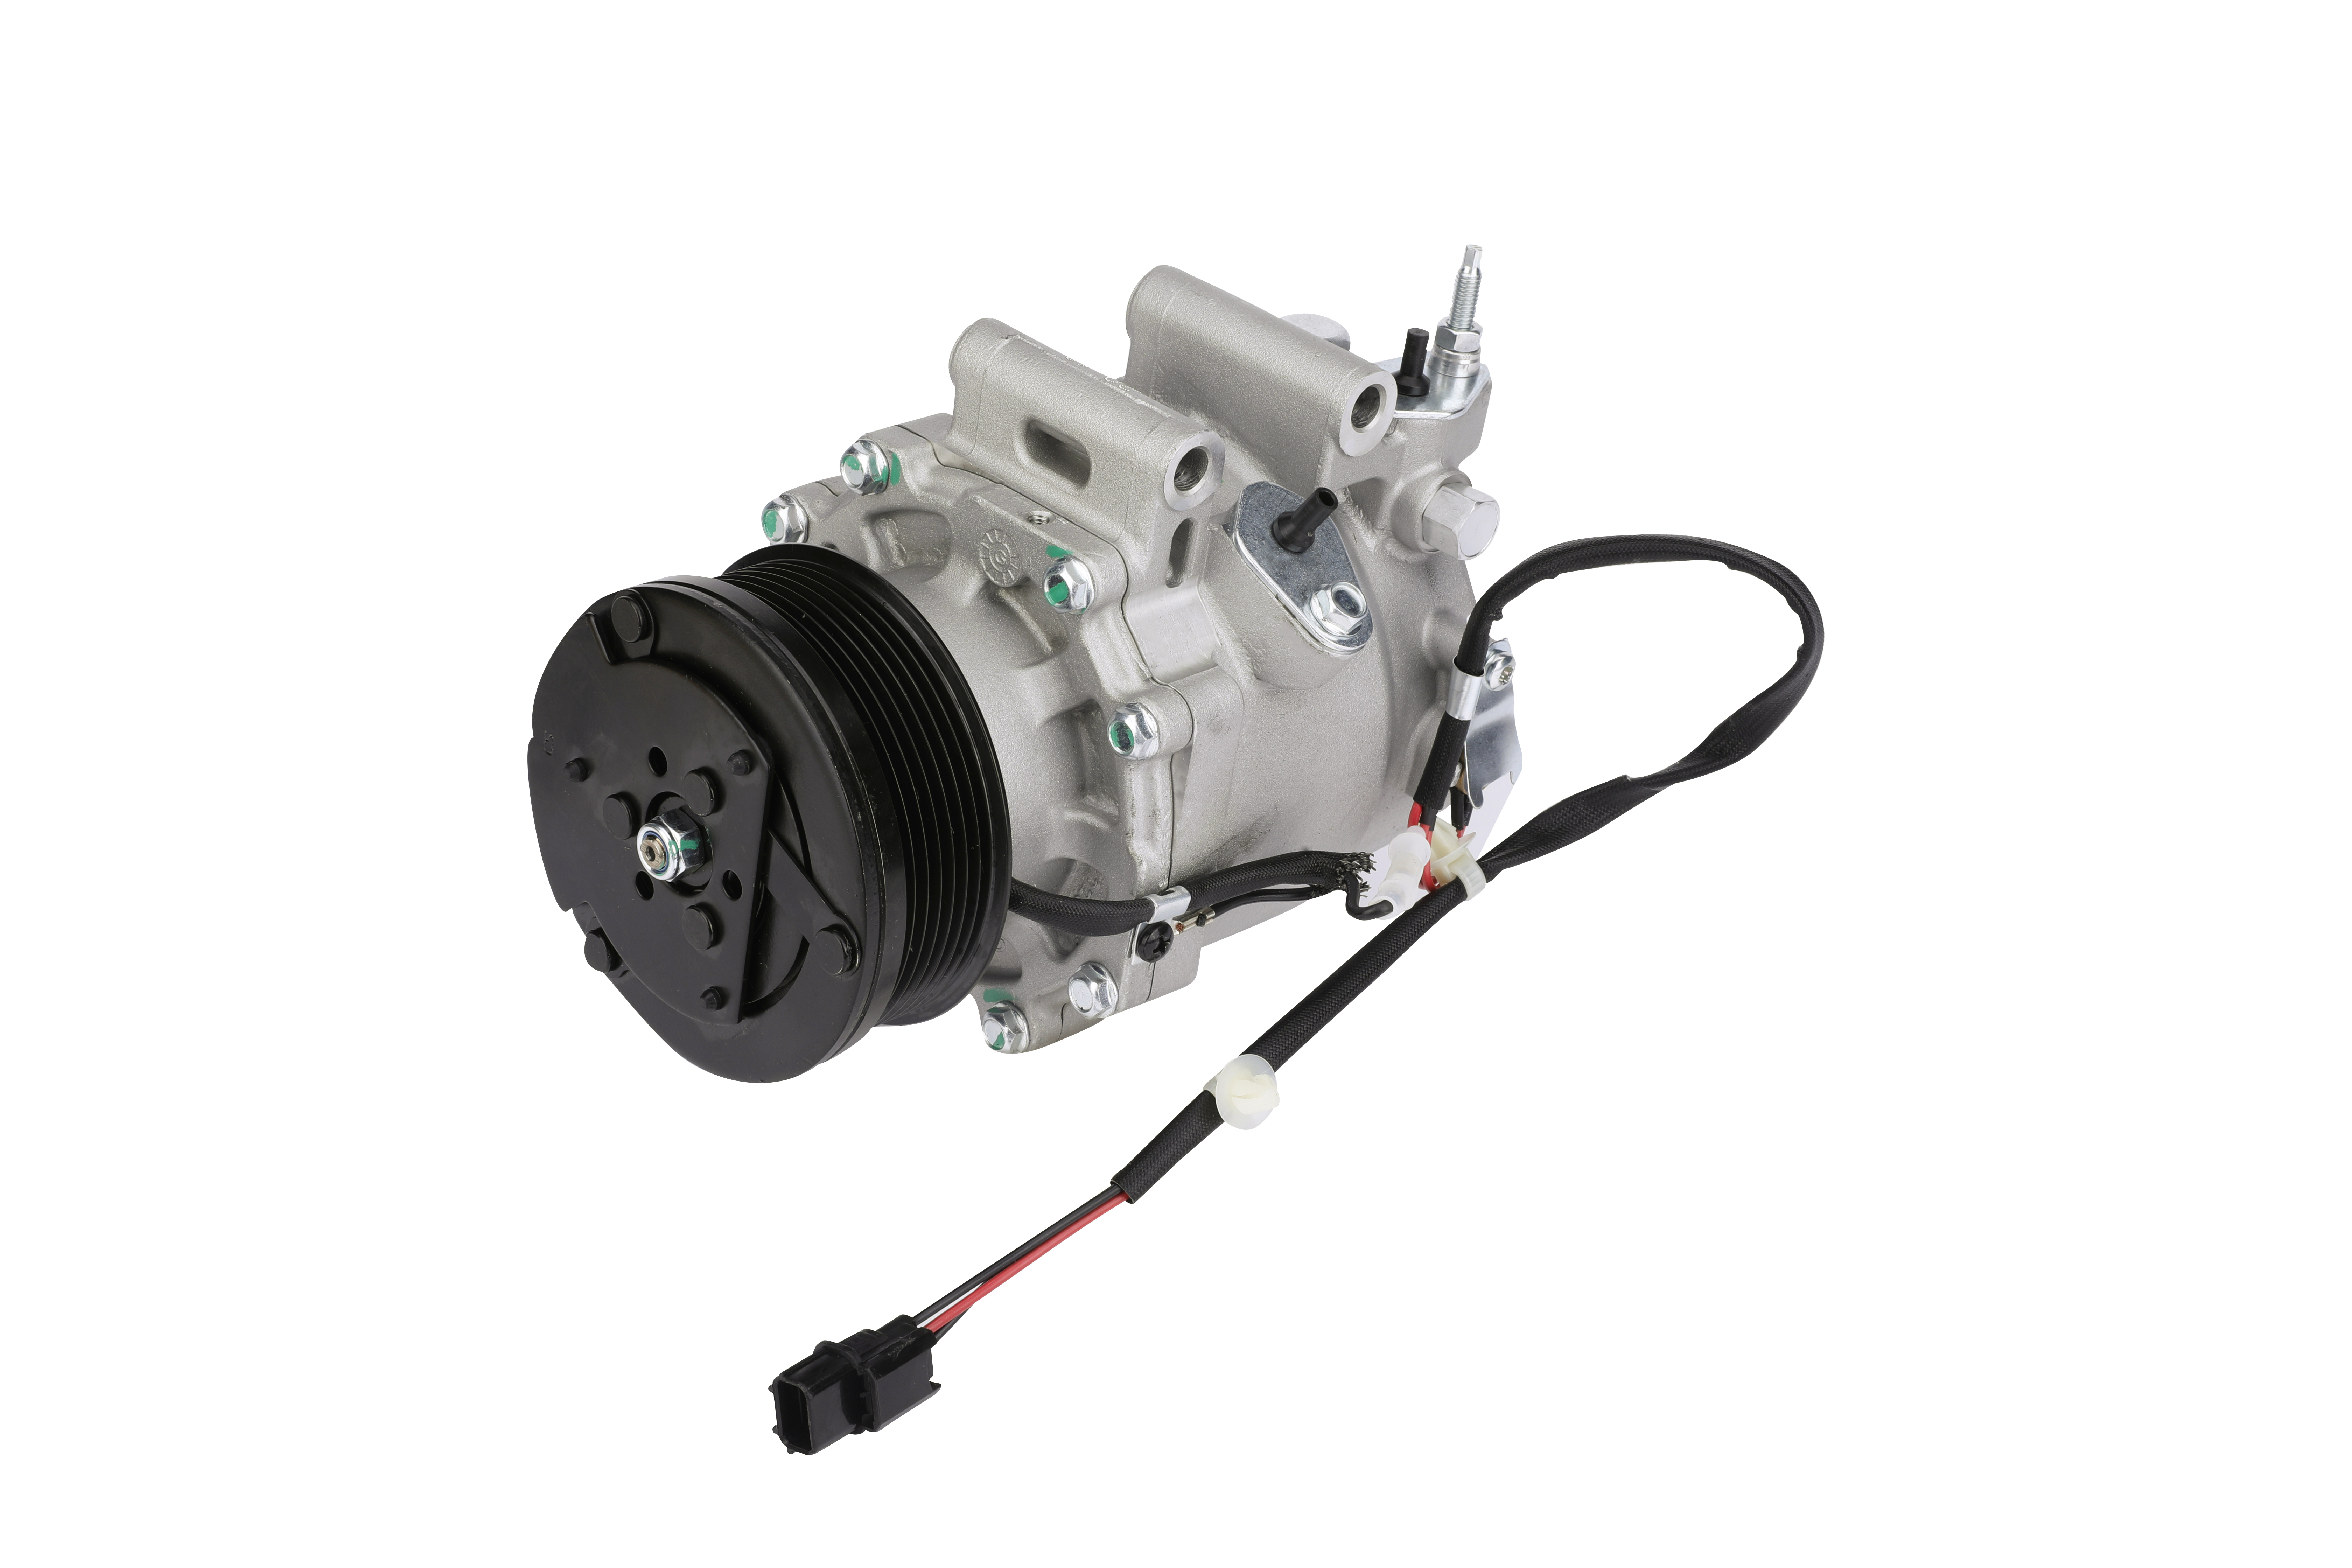 Replacement AC Compressor - Replaces 38810RRBA01 for Honda Civic Image